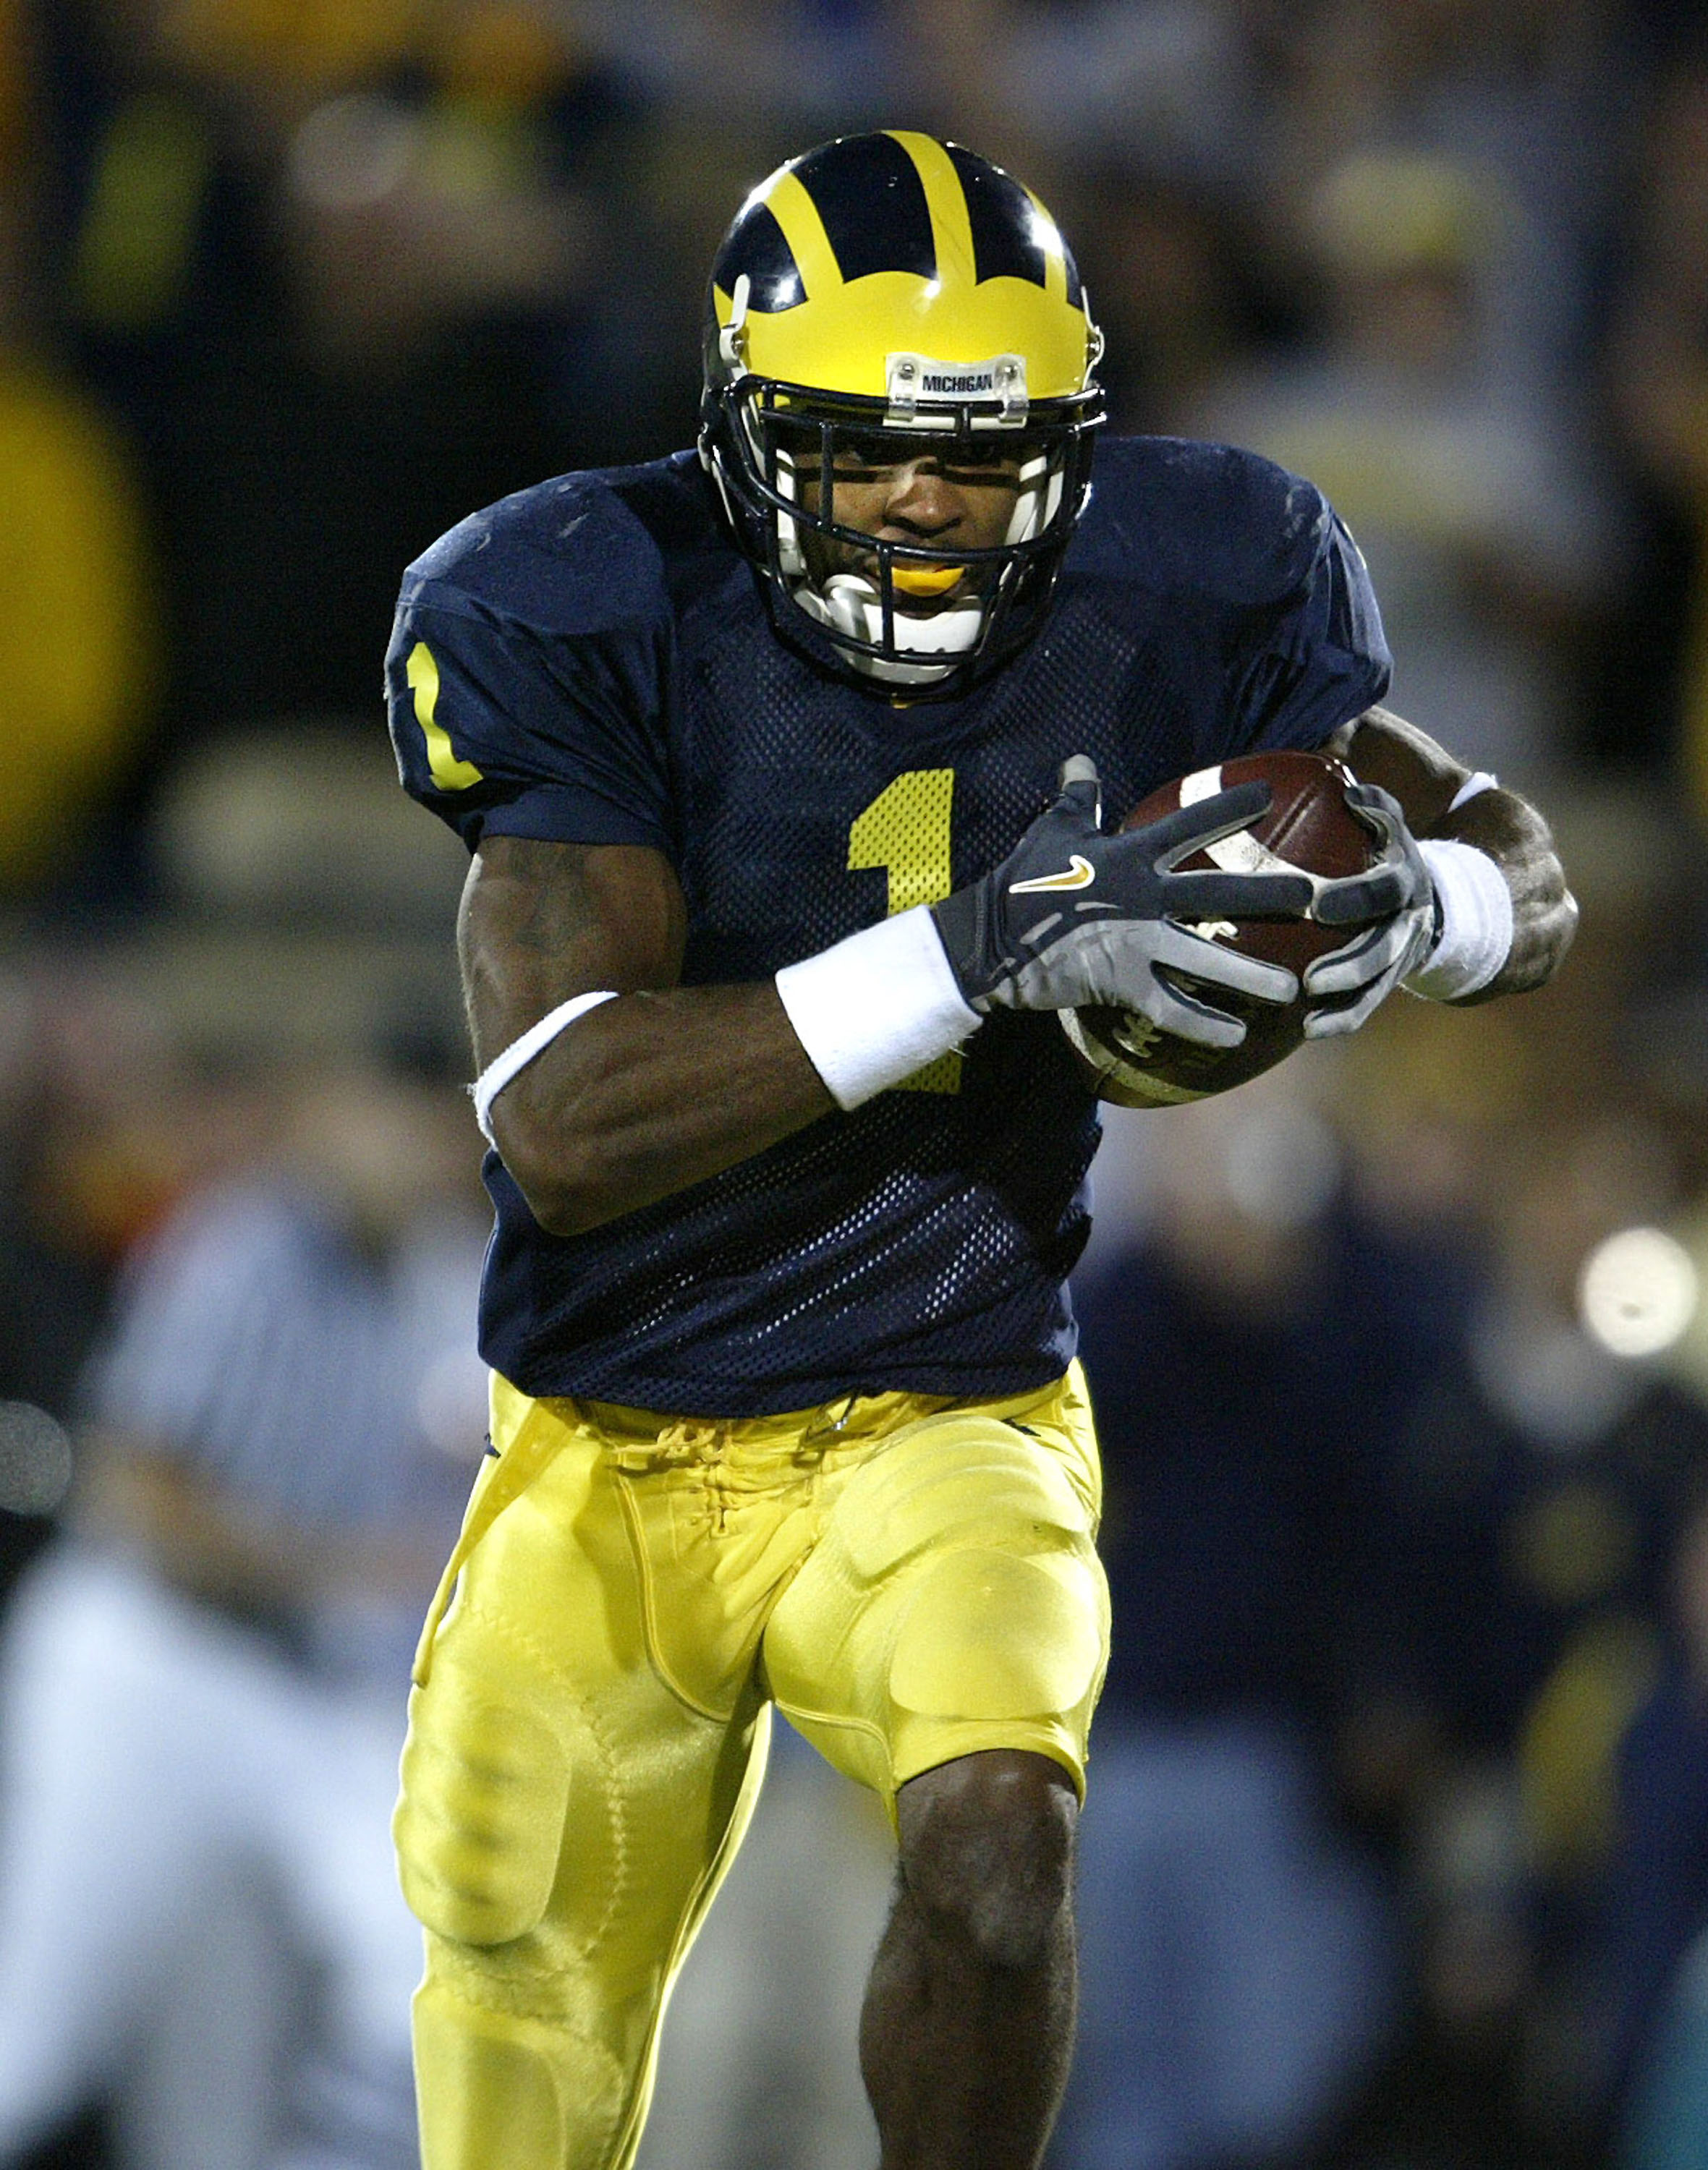 ANN ARBOR, MI - OCTOBER 30:  Wide Receiver Braylon Edwards #1 of the Michigan Wolverines catches a touchdown pass in the third overtime period against the Michigan State Spartans at Michigan Stadium on October 30, 2004 in Ann Arbor, Michigan. Michigan won